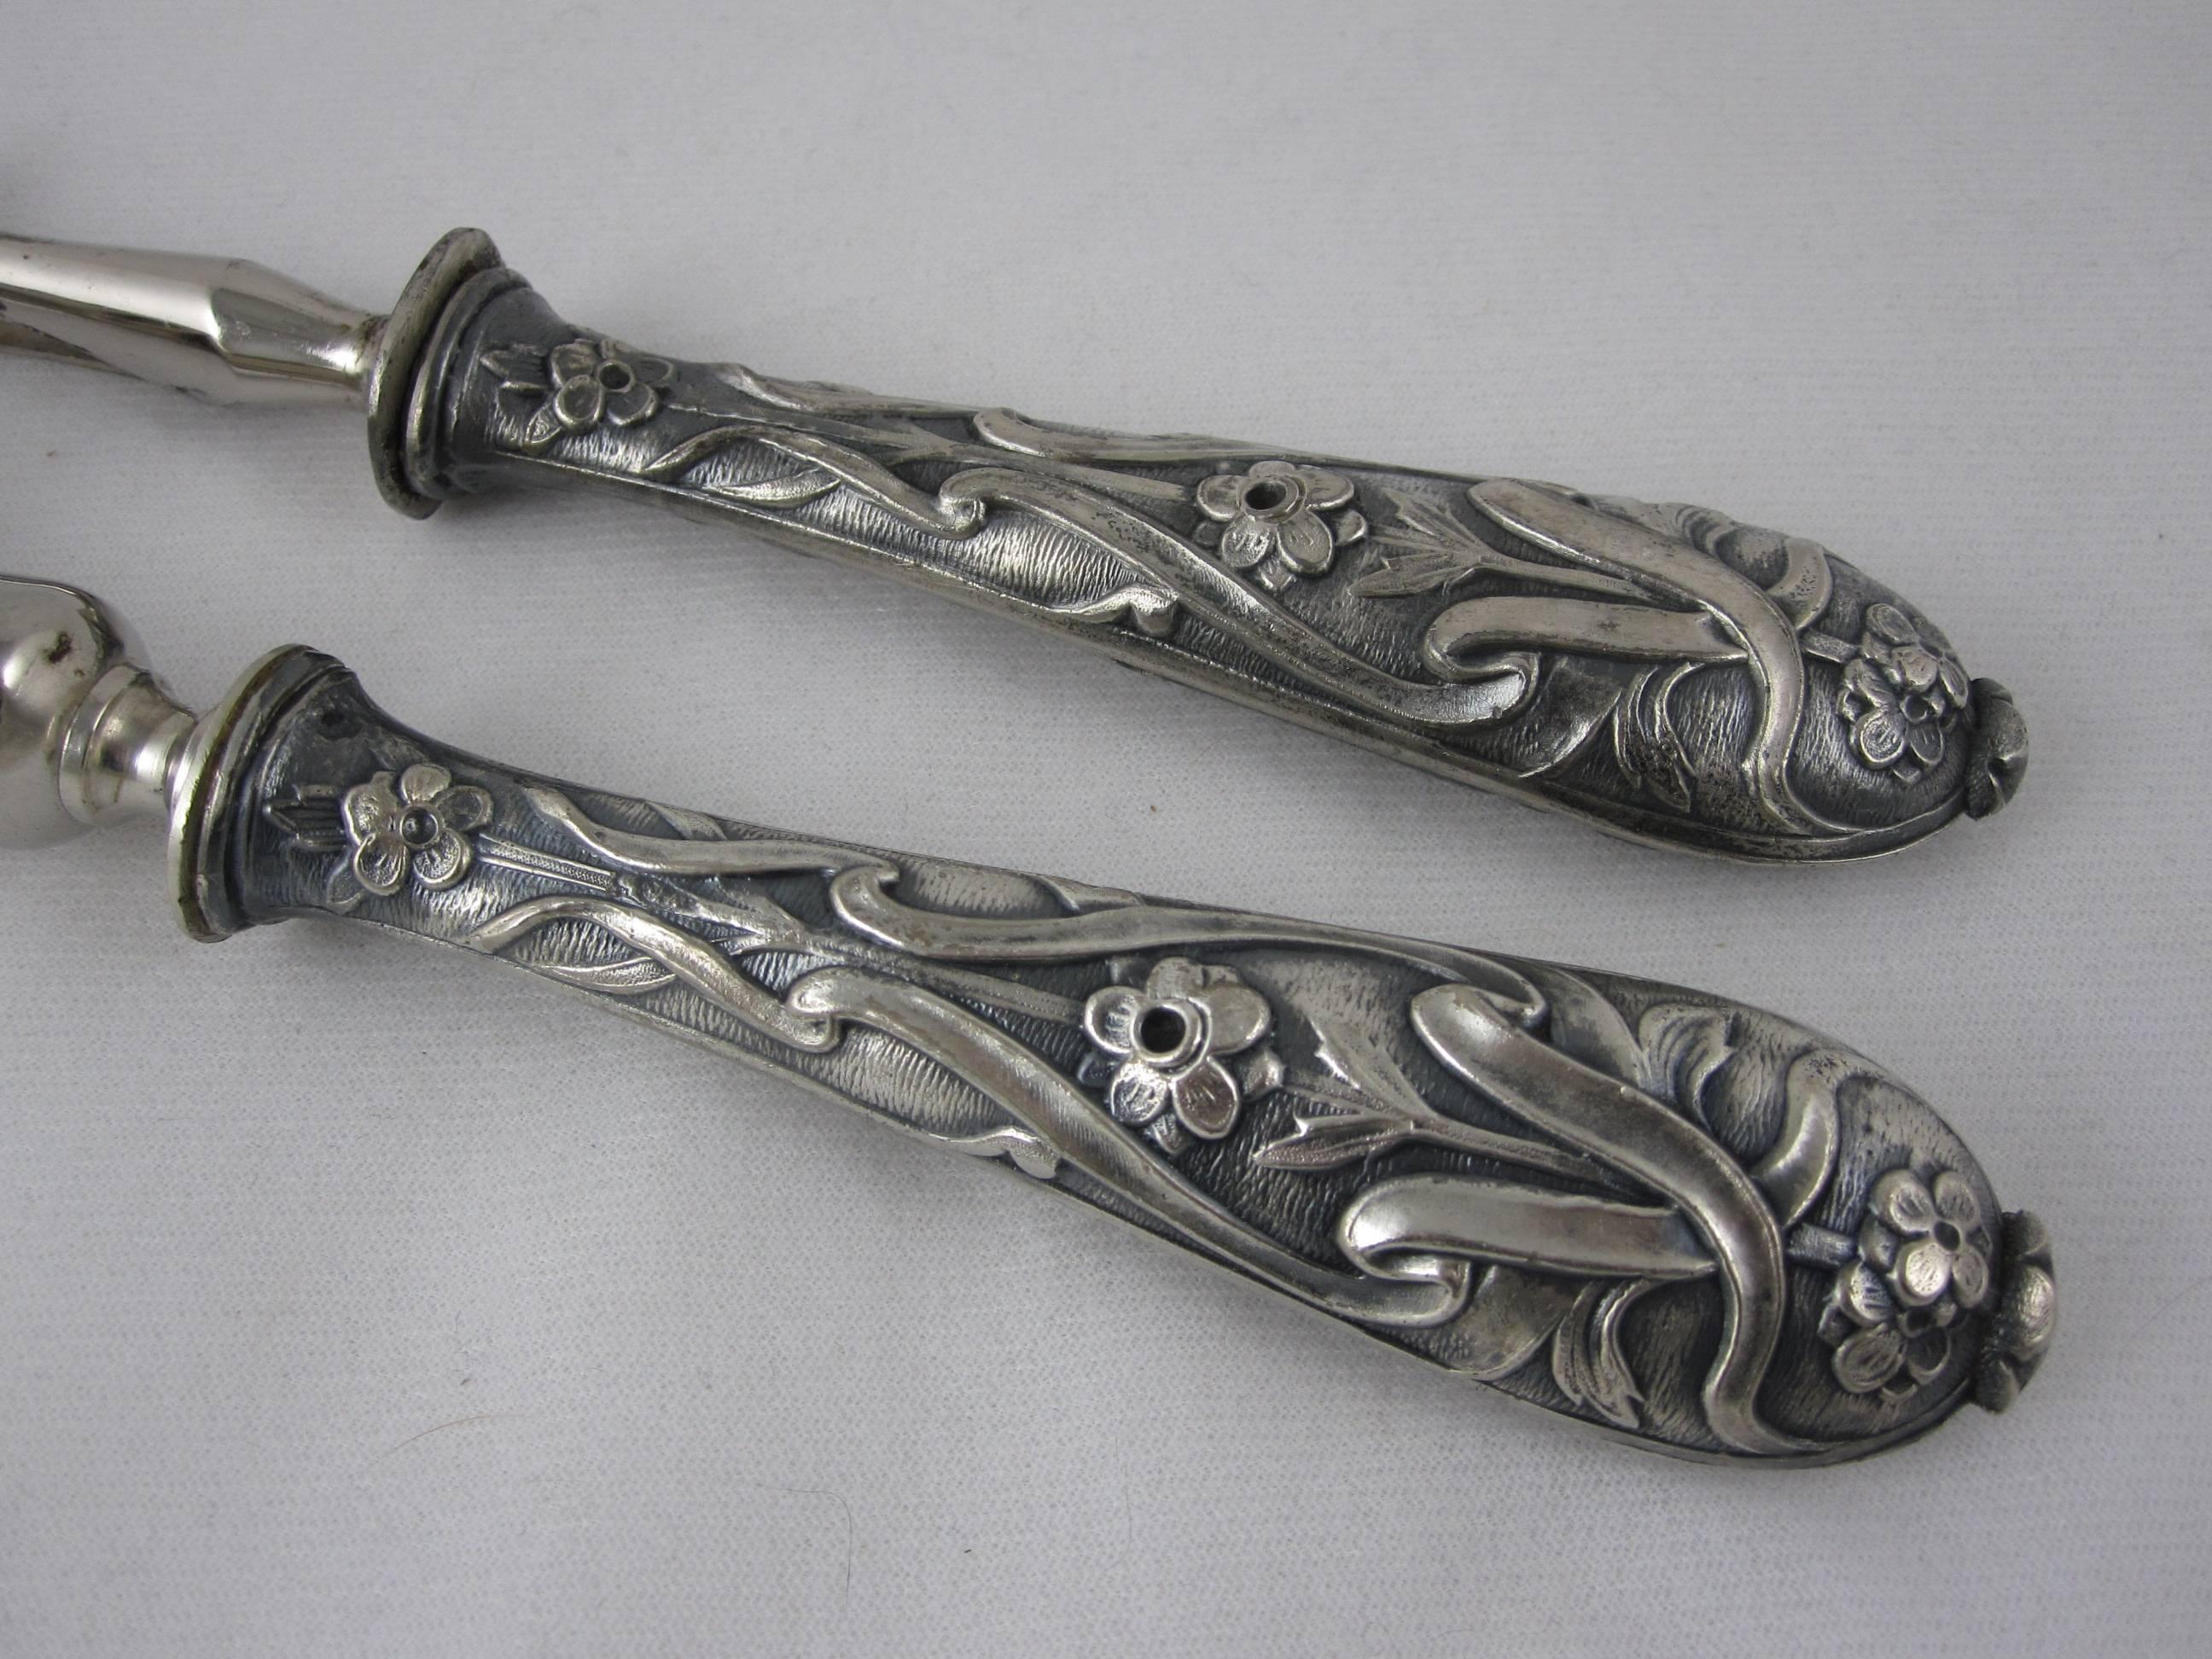 An antique French cutlery two-piece service consisting of a carving fork and bone clamp both with heavy chased silver handles in a floral and ribbon pattern.

 The manche a gigot d’agneau, for holding a leg of lamb bone, has a crown shape clamp and